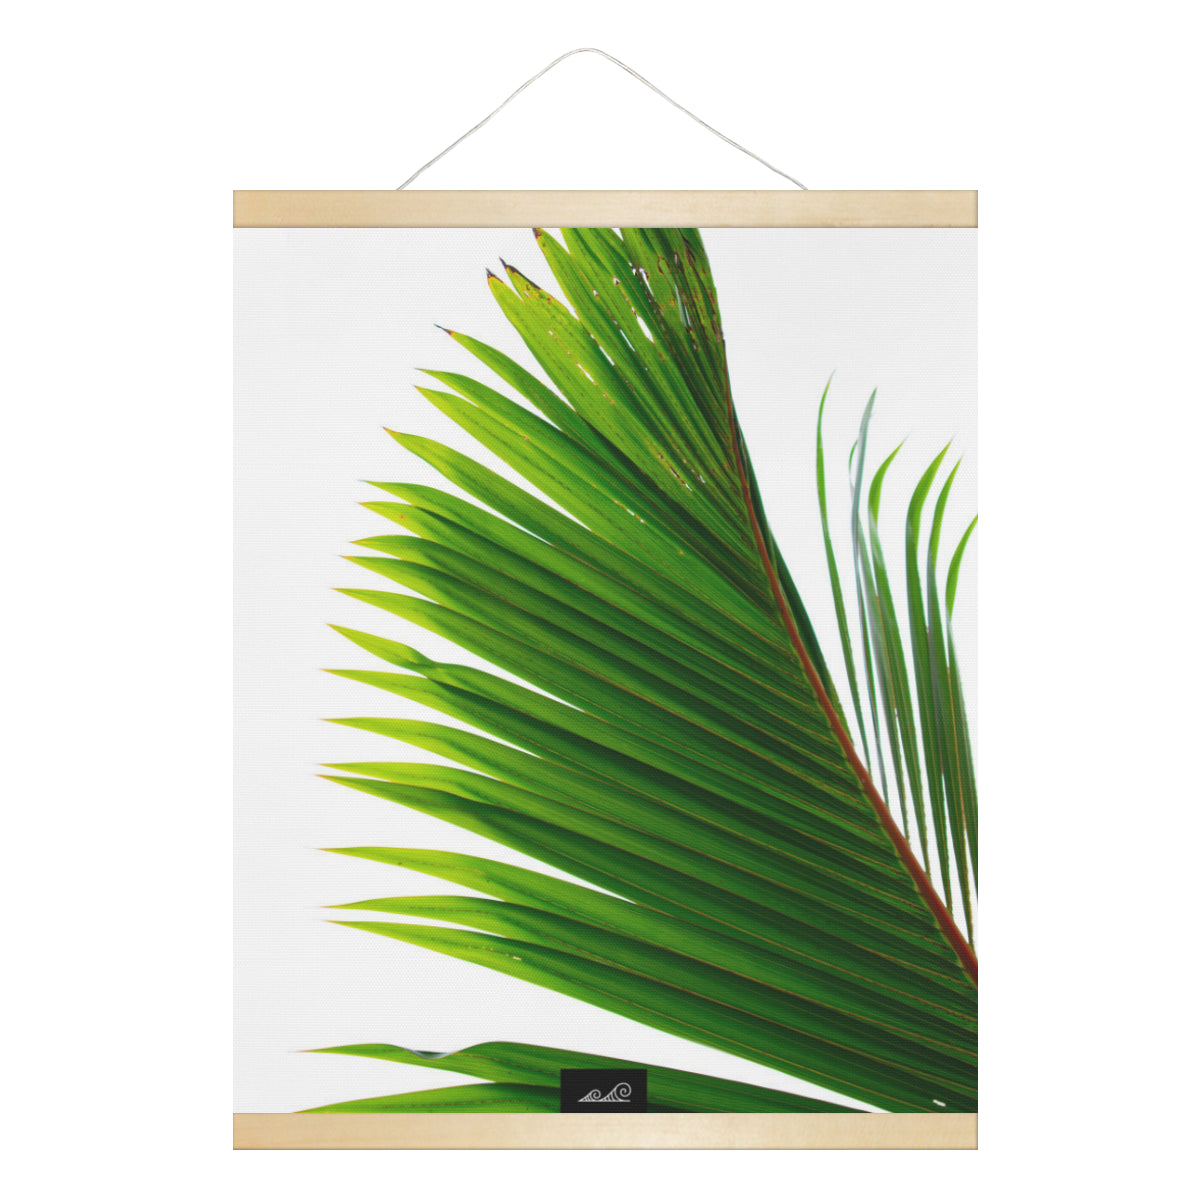 Coconut Tree Leaf Guam CNMI Hanging Canvas Poster with Wood Frame